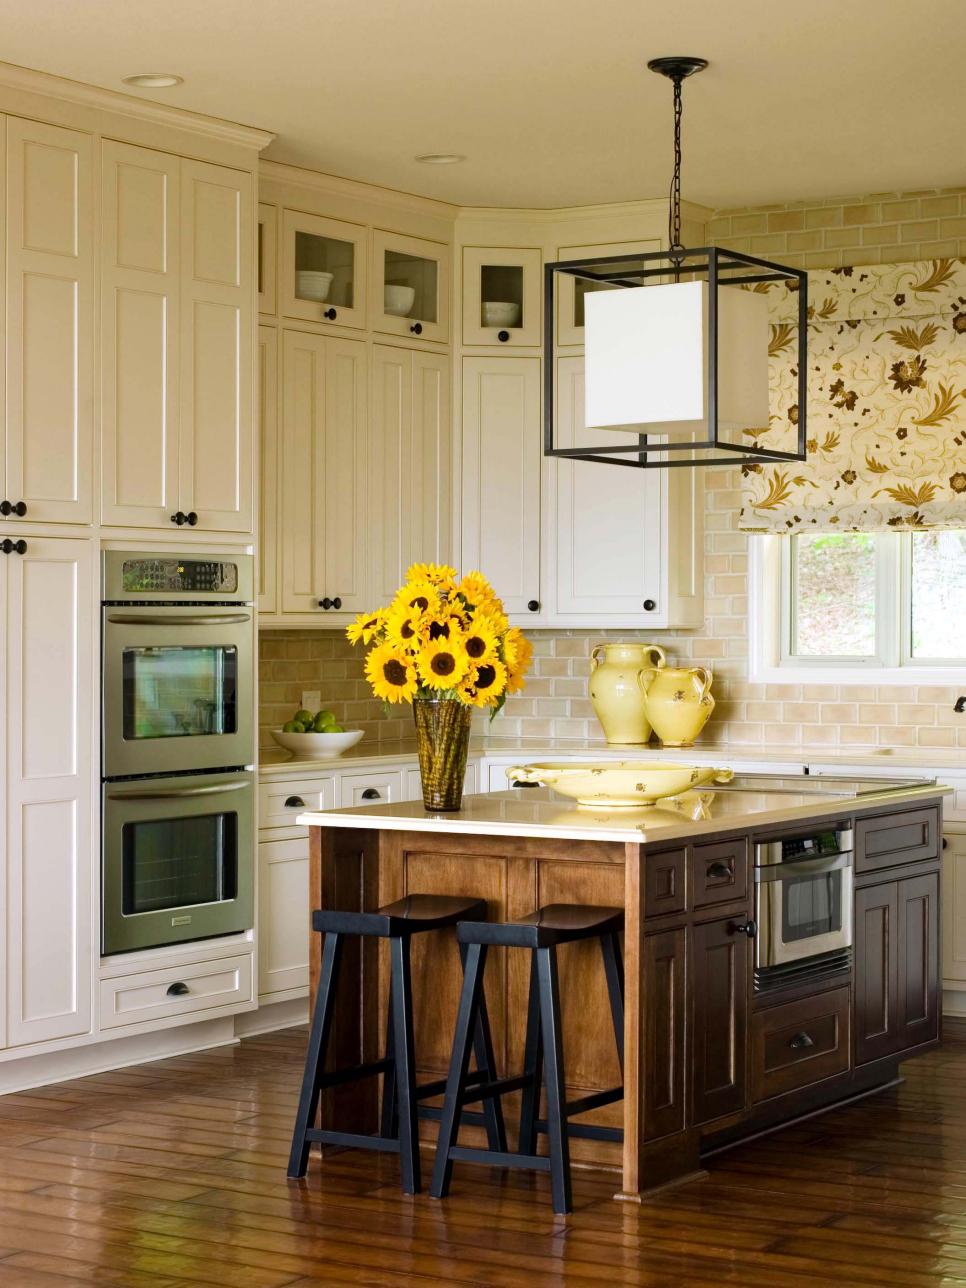 Neutral Transitional Kitchen With Cube Light Fixture and Large Island